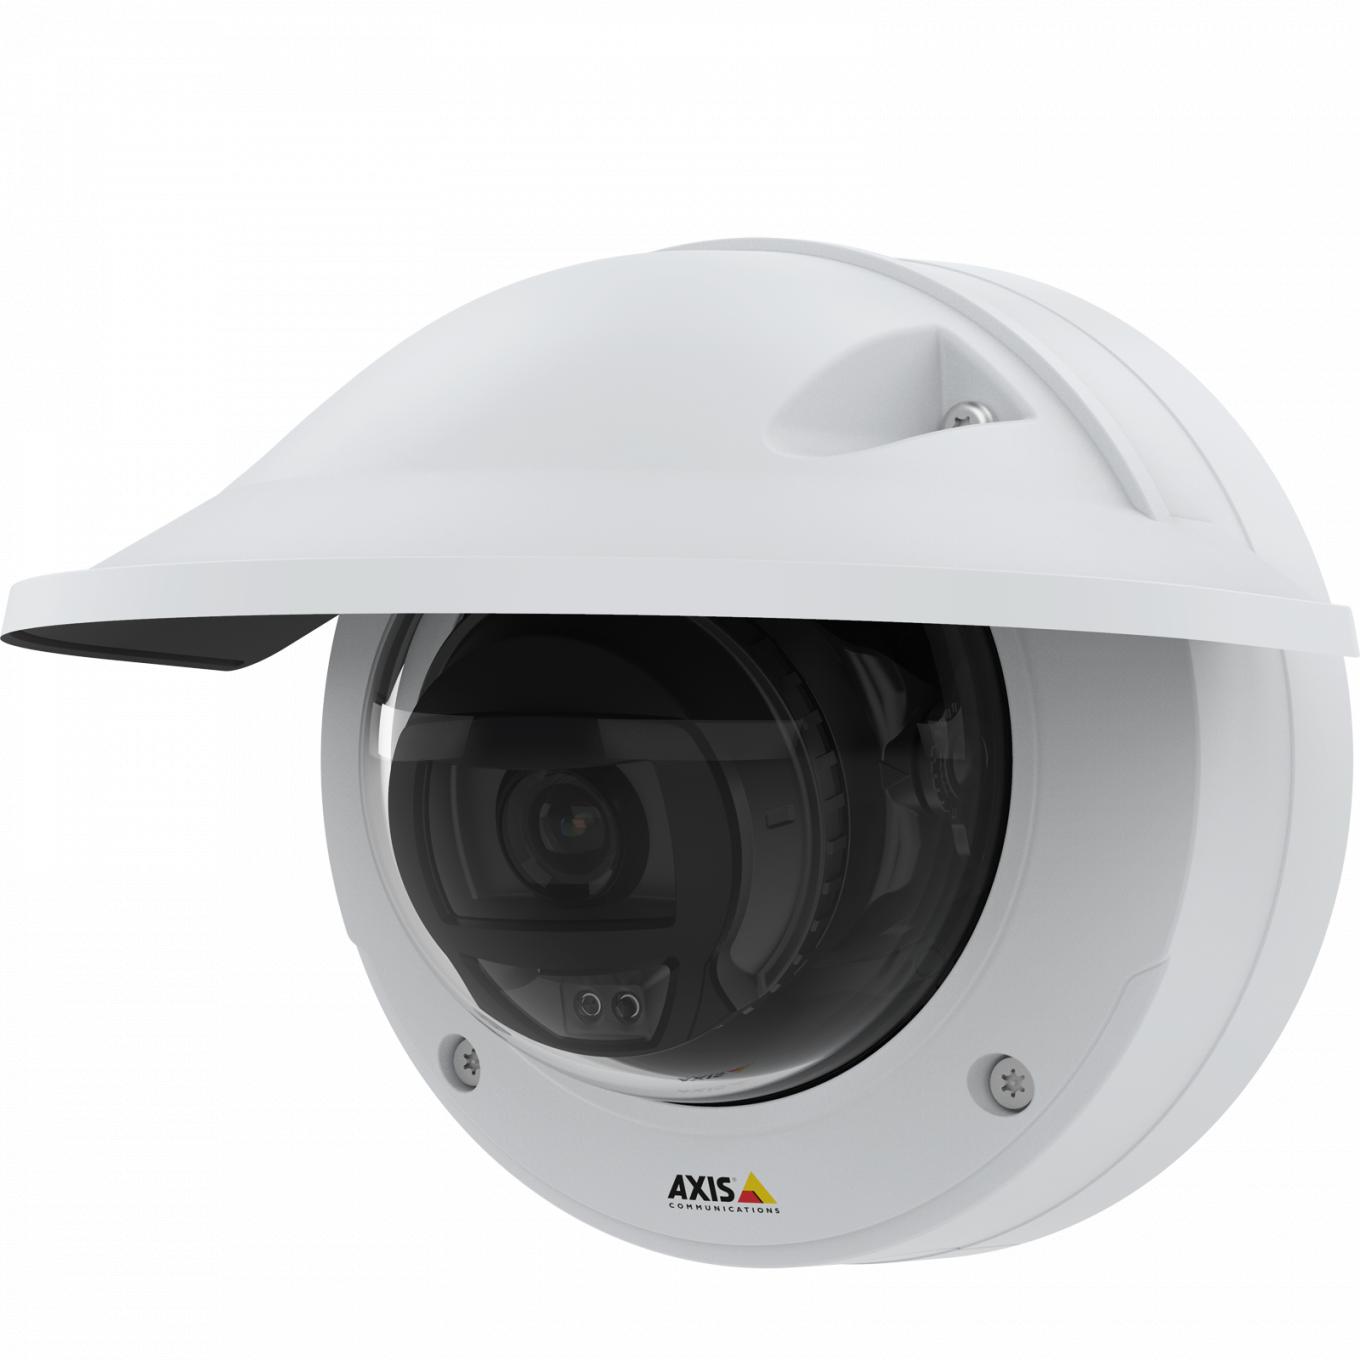 IP Camera AXIS p3245 lve has HDTV 1080p video quality. The camera is viewed from it´s left and has weathershield.